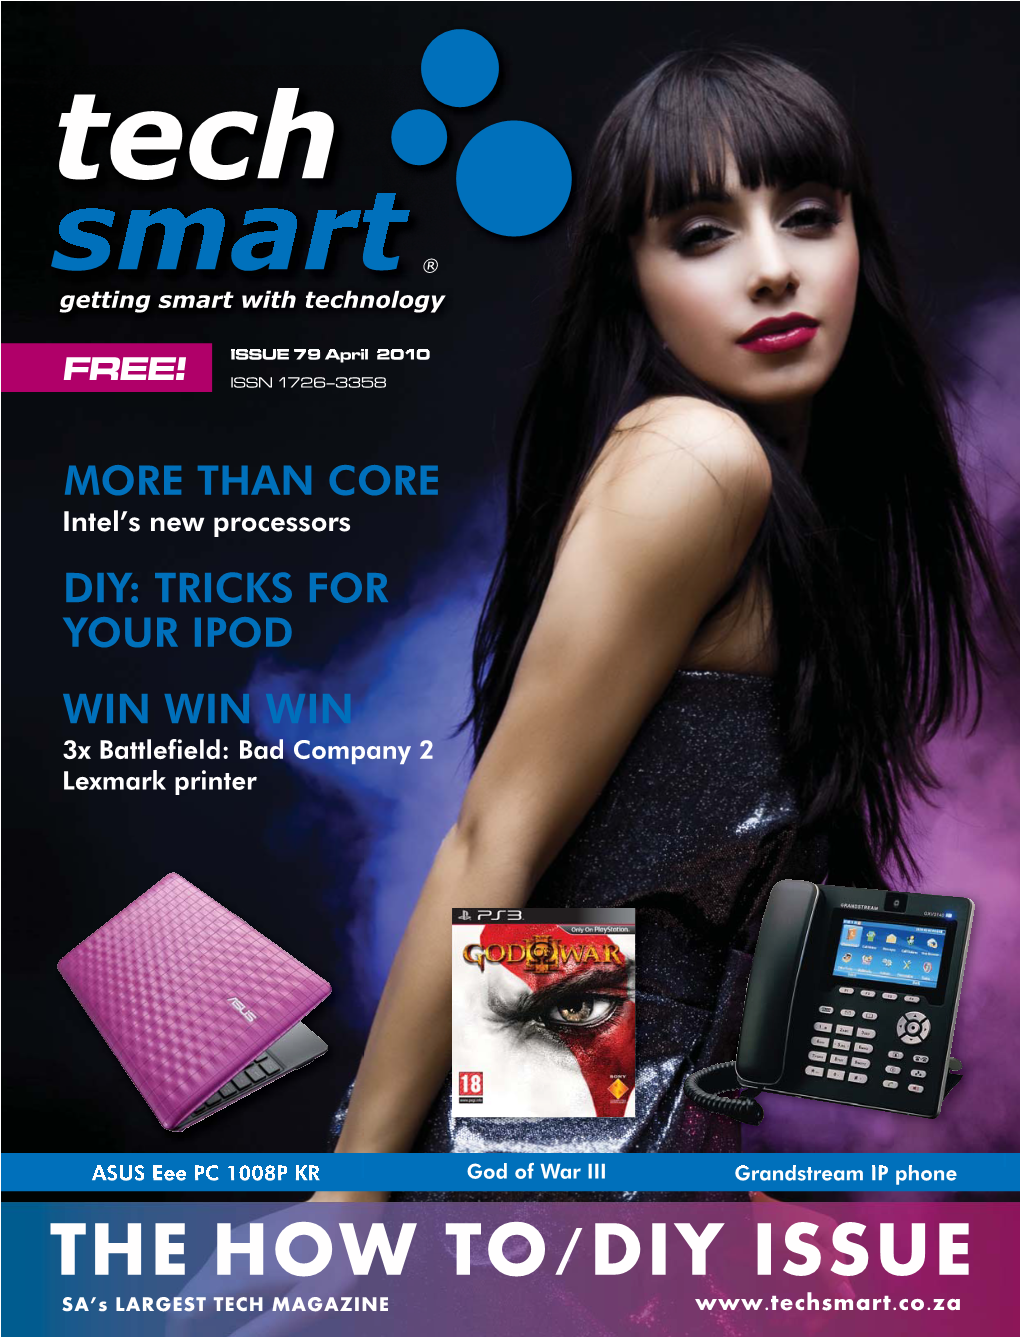 THE HOW TO/DIY ISSUE SA’S LARGEST TECH MAGAZINE 2 EDITORIAL CONTENTS Techsmart 79